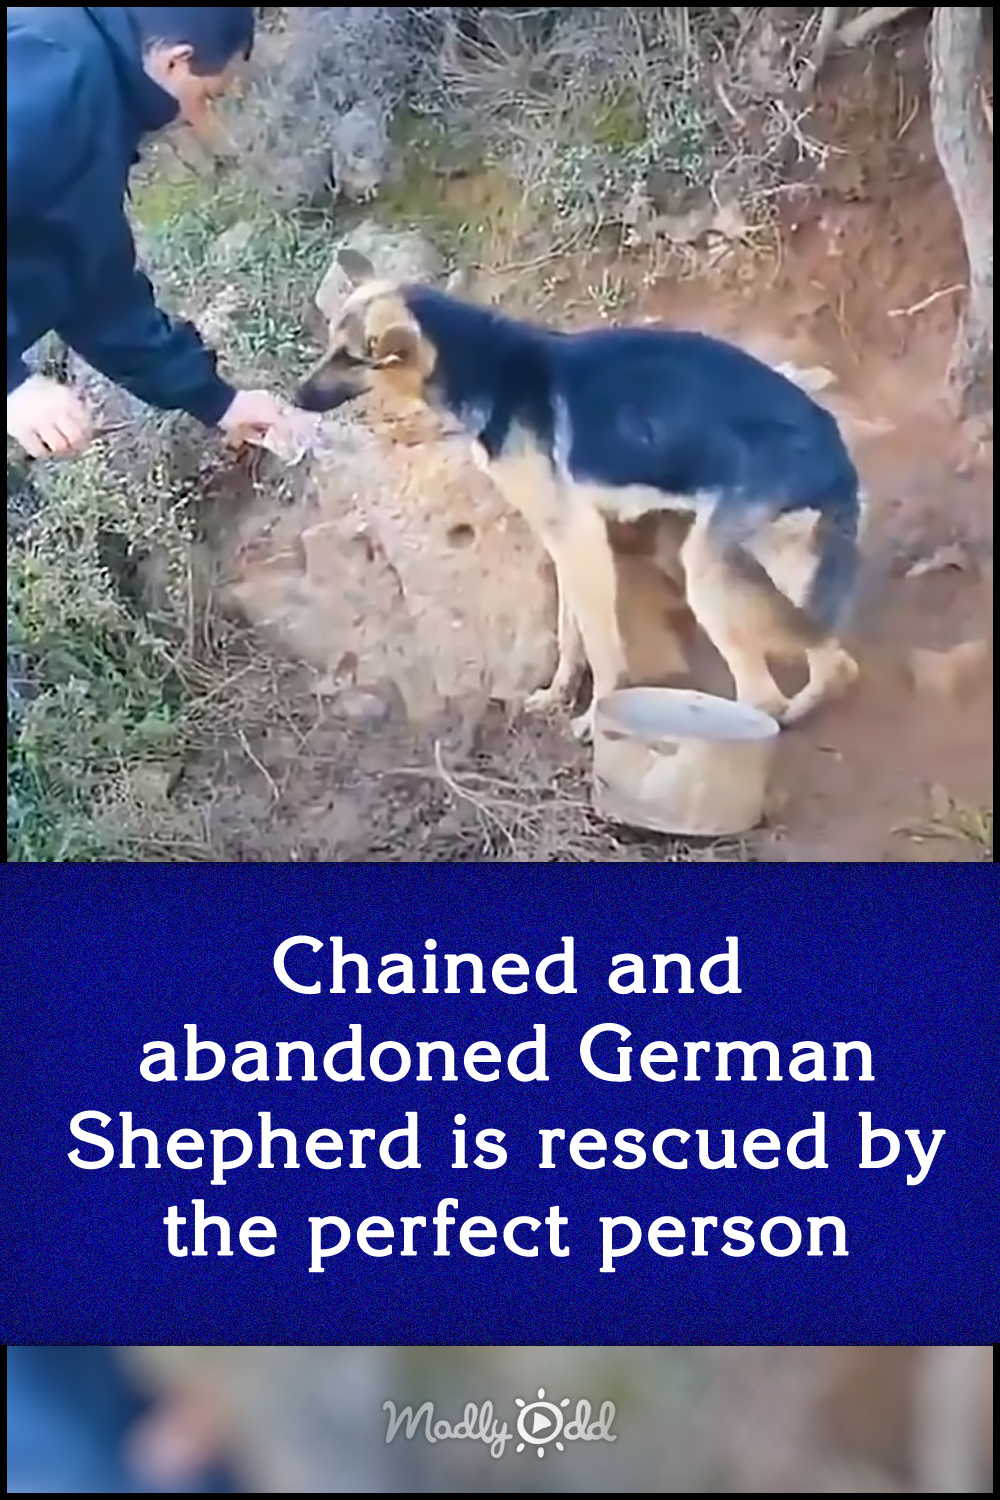 Chained and abandoned German Shepherd is rescued by the perfect person